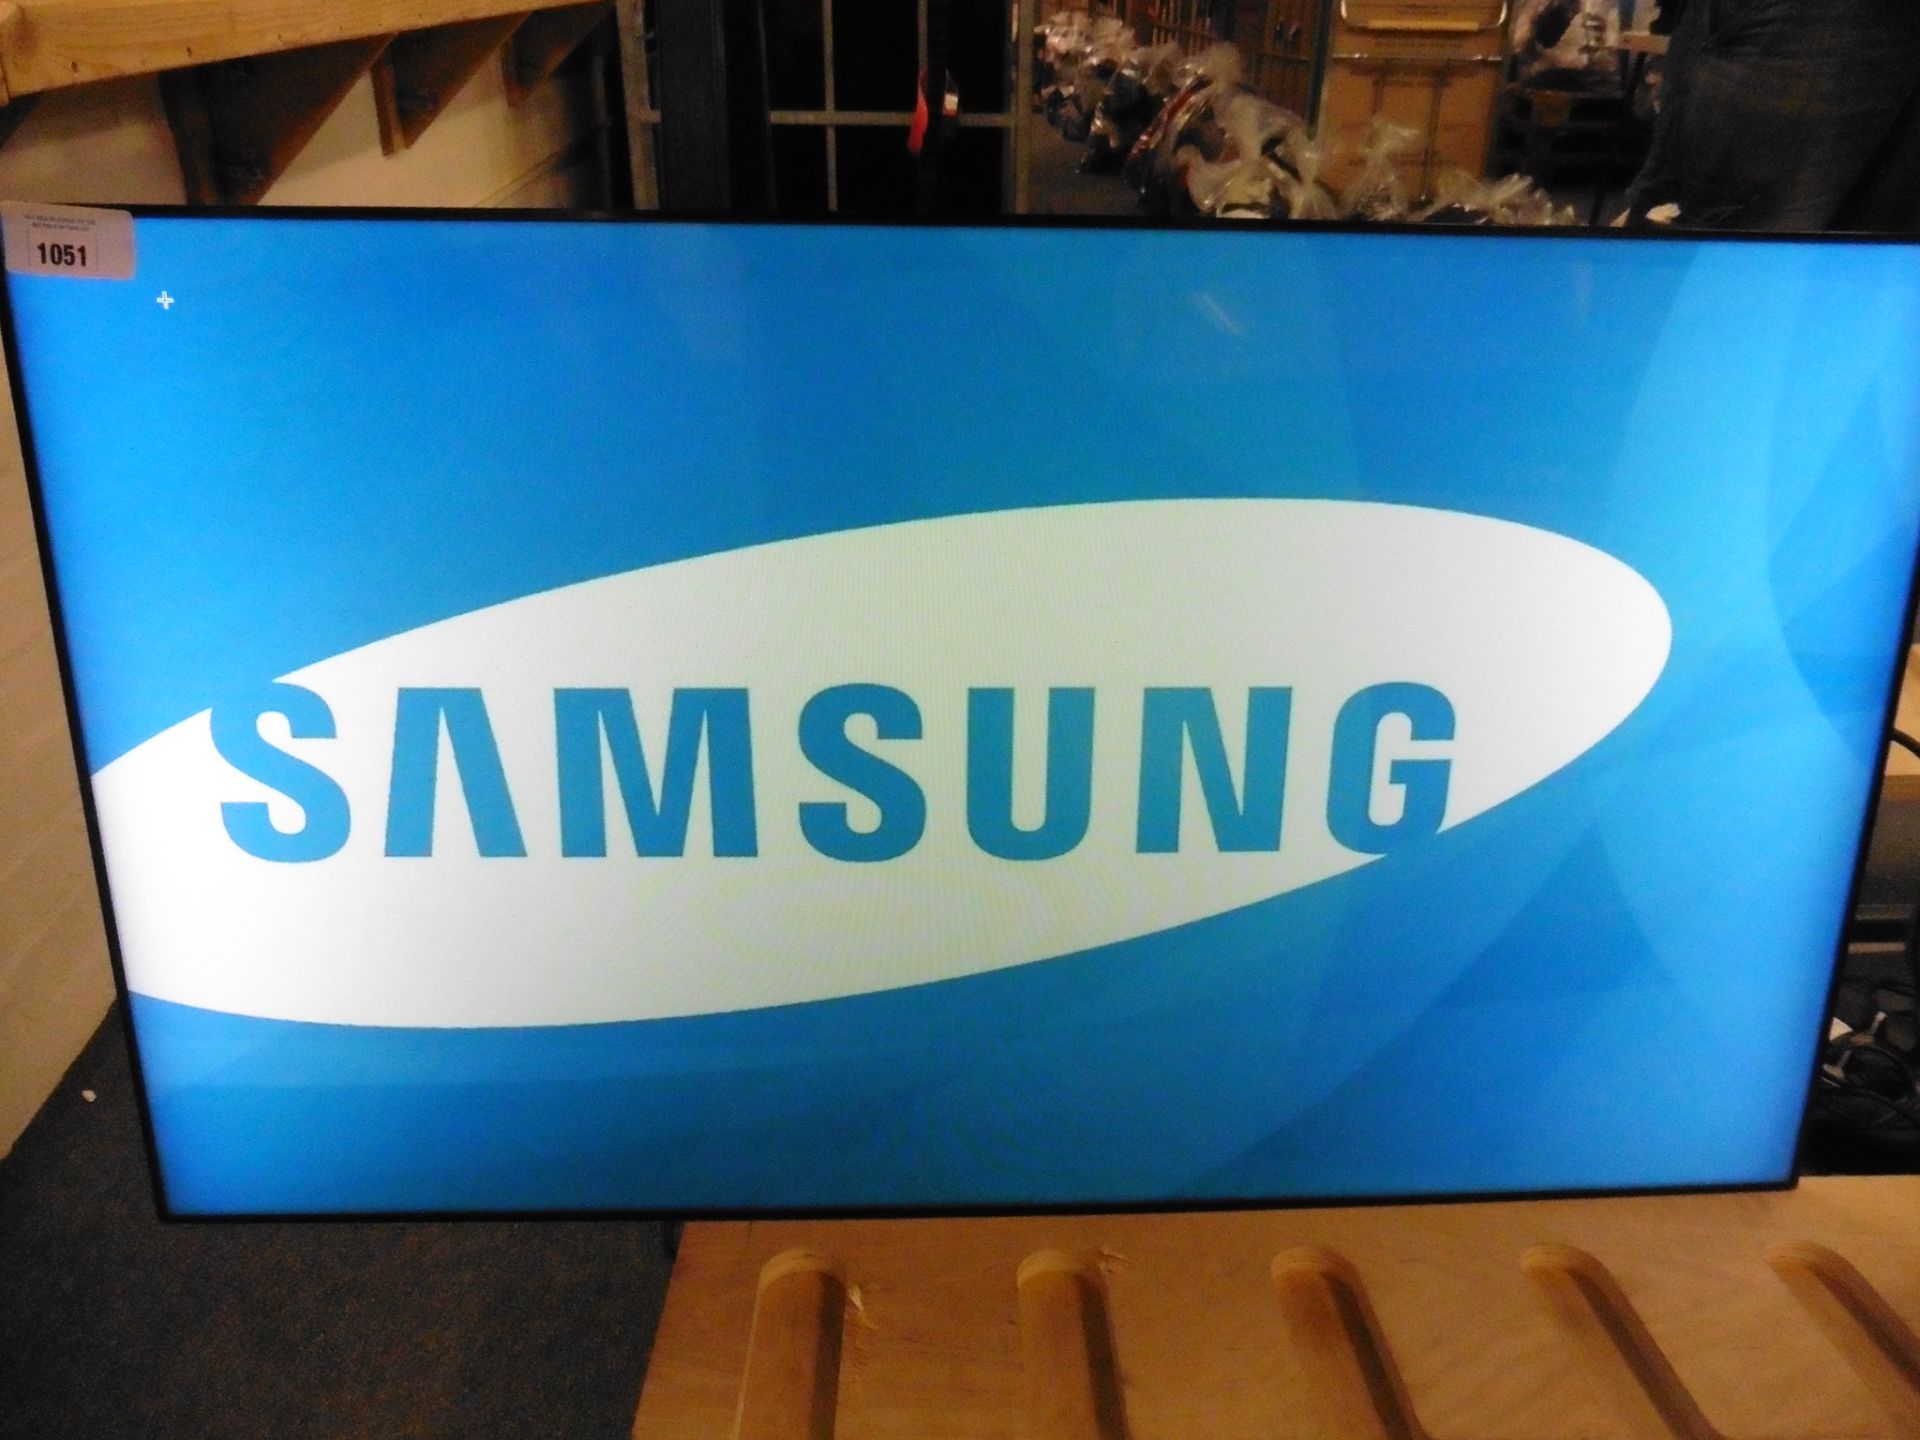 Samsung model UE46C colour display screen with remote (manufactured 2014)